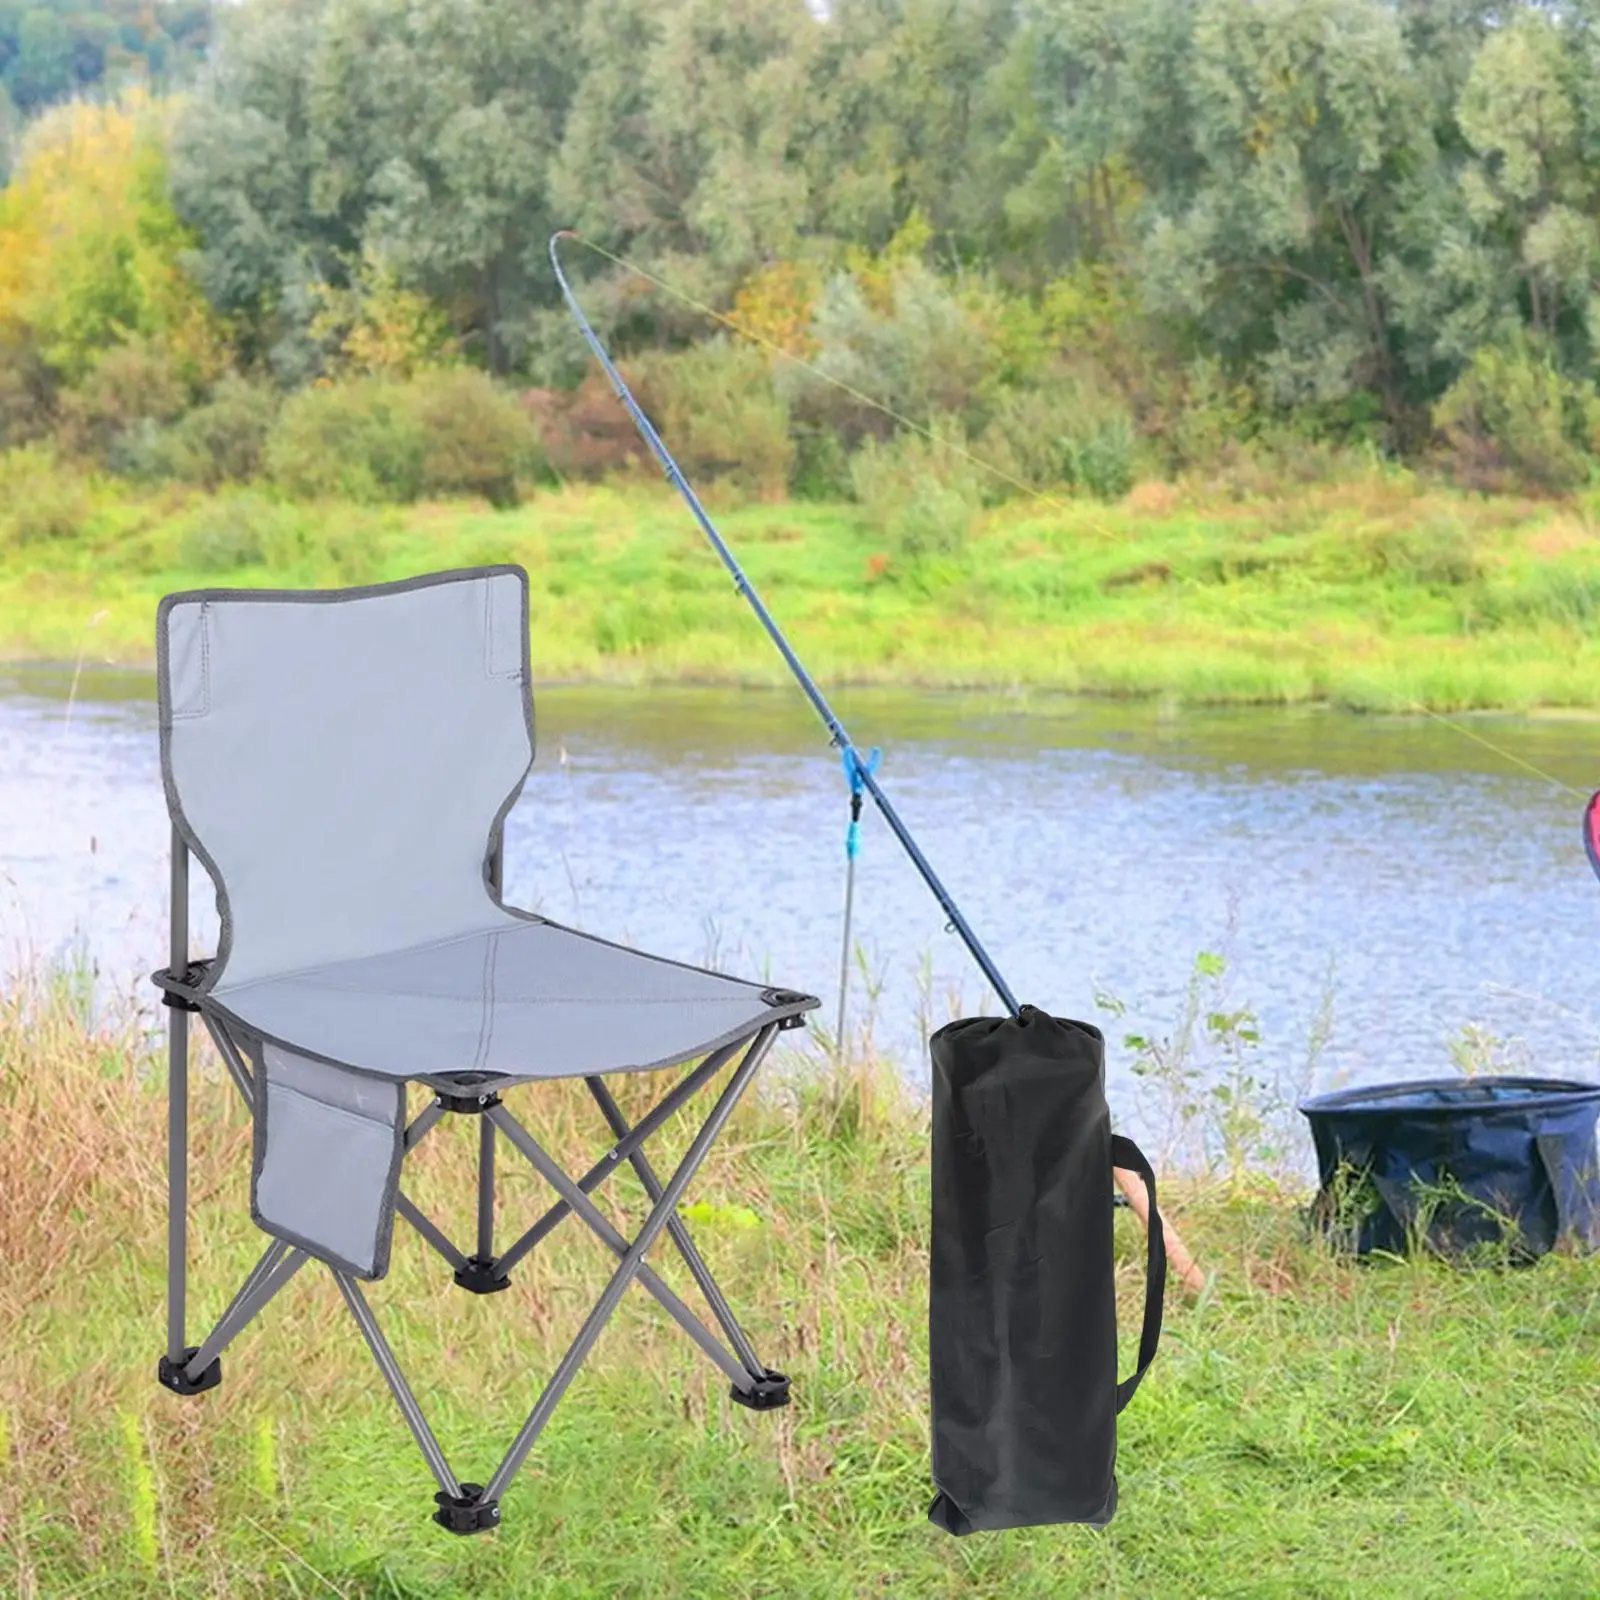 Portable Folding Camping Chairs, Strong Sturdy Portable Folding Chairs Outdoor